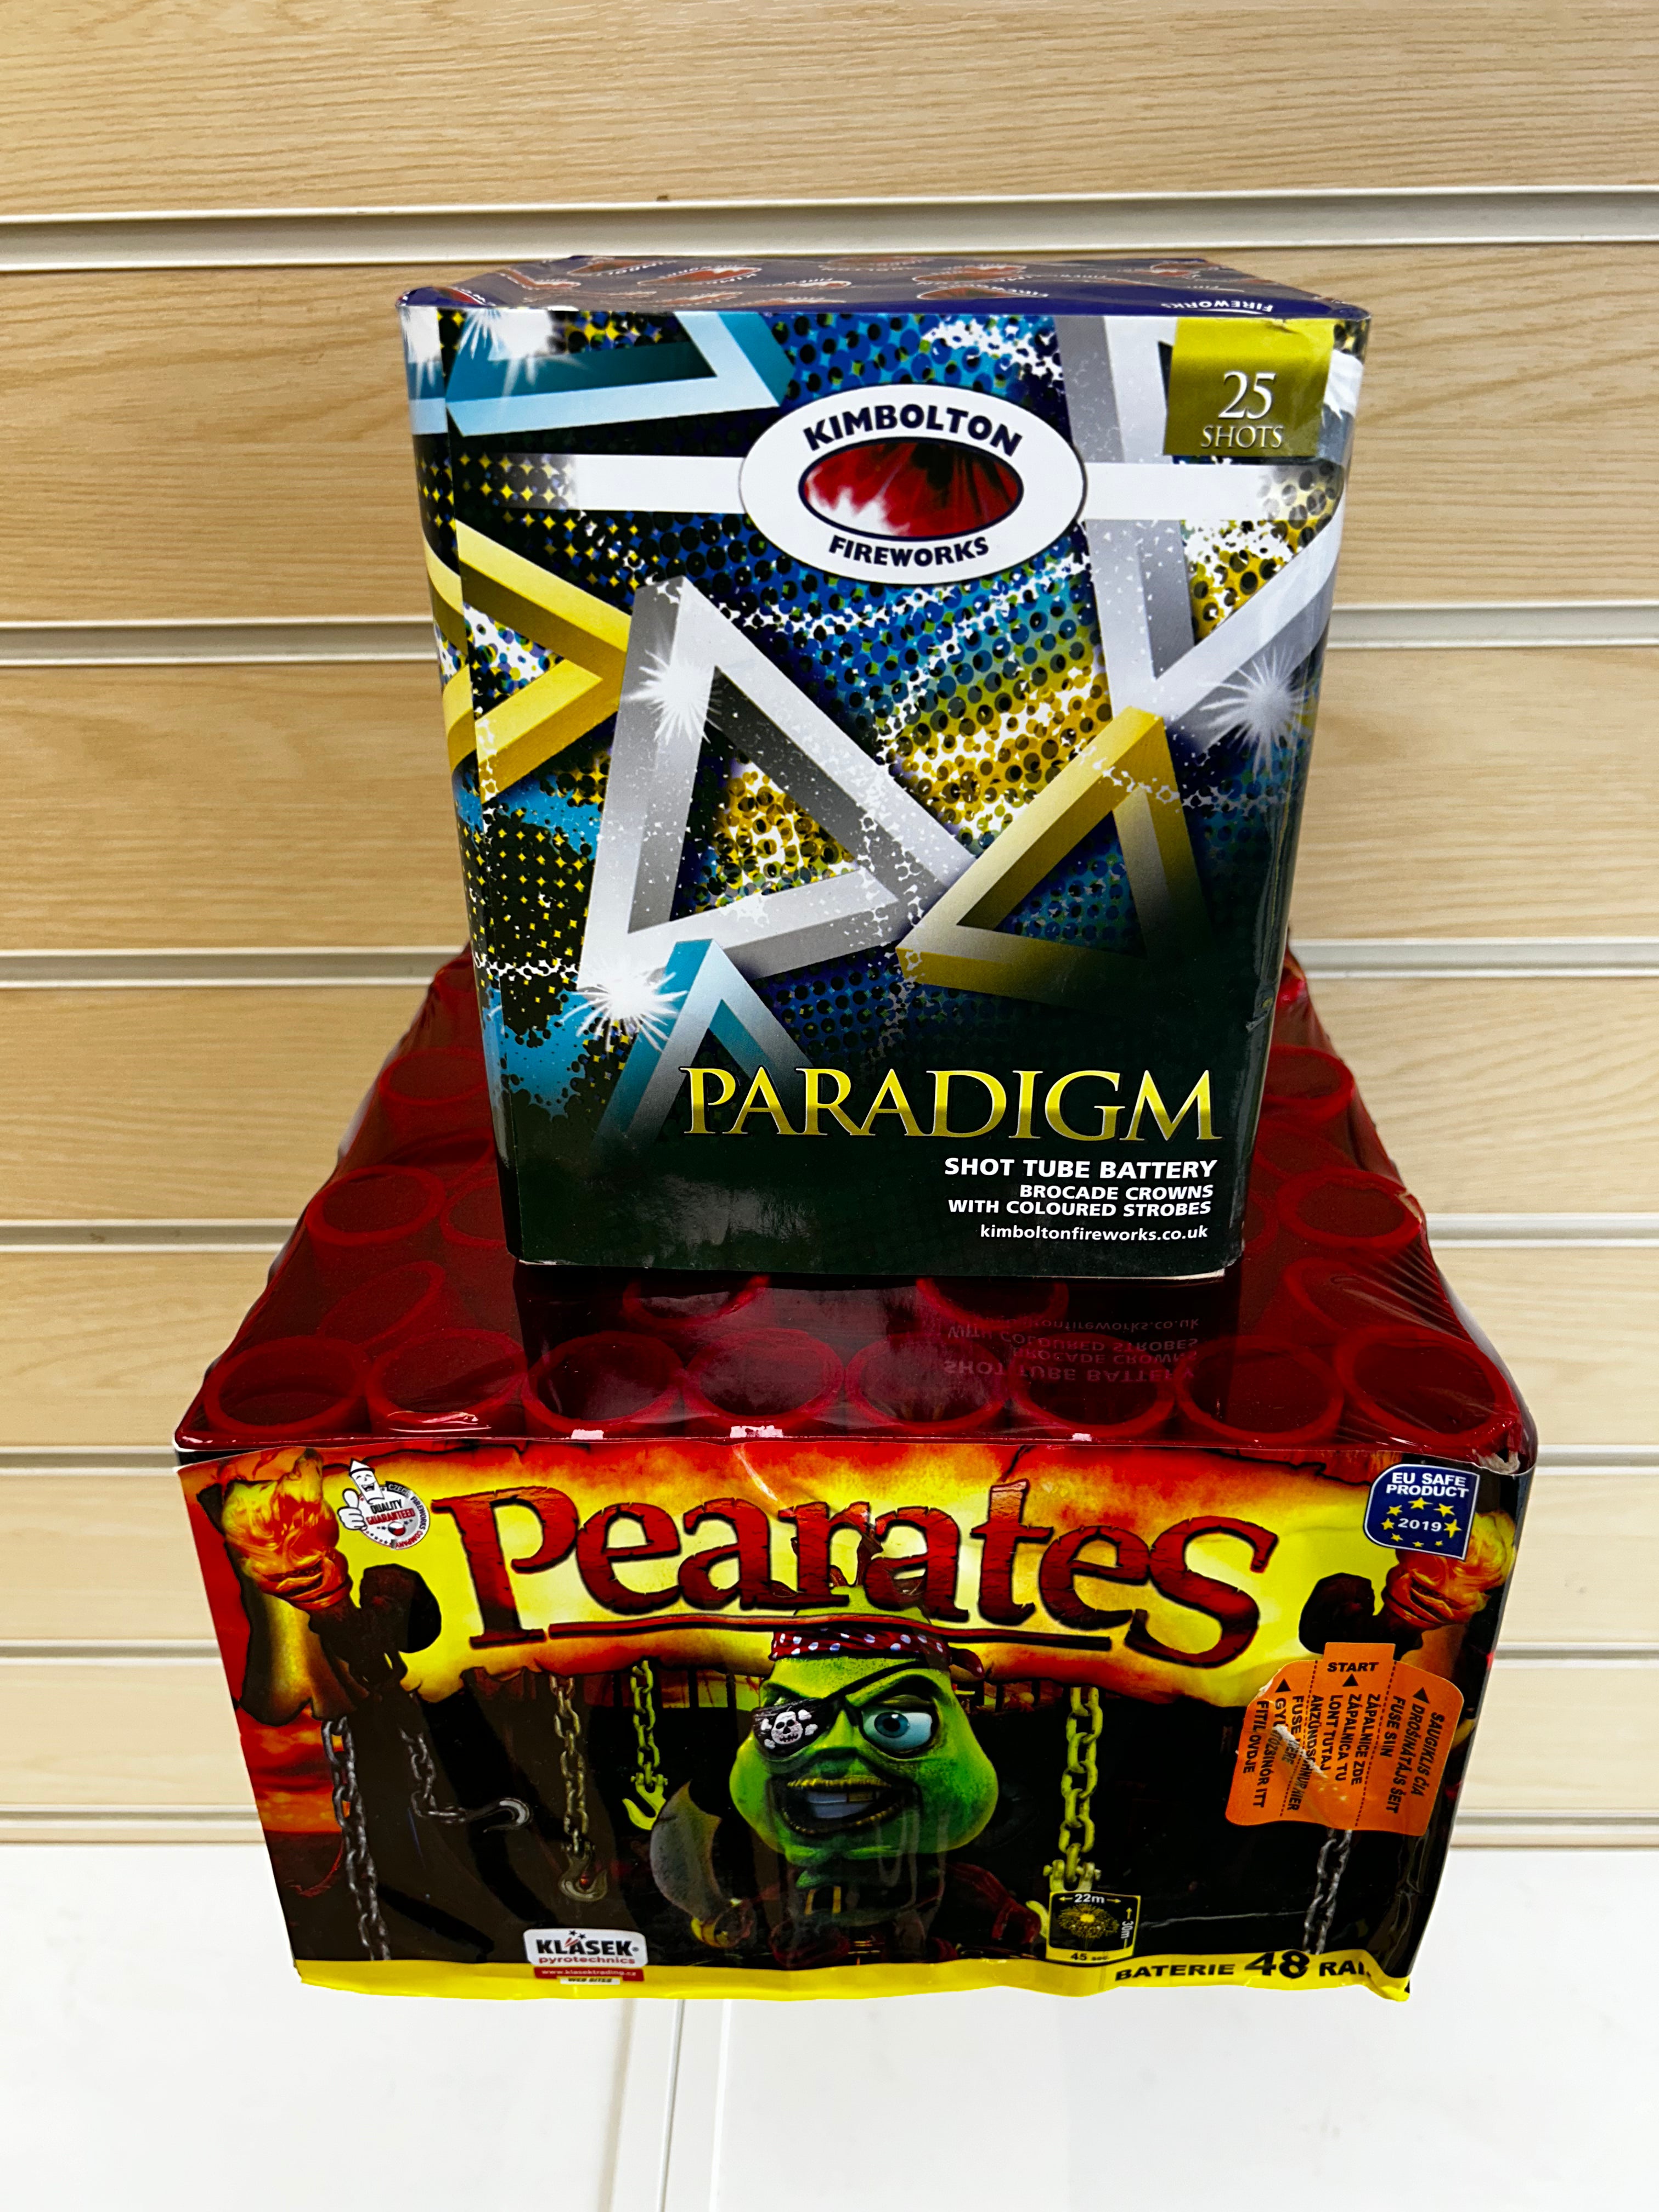 Pearates , FREE £39.99 PARADIGM FIREWORK WHEN YOU BUY PEARATES , WOW LIMITED STOCK!!